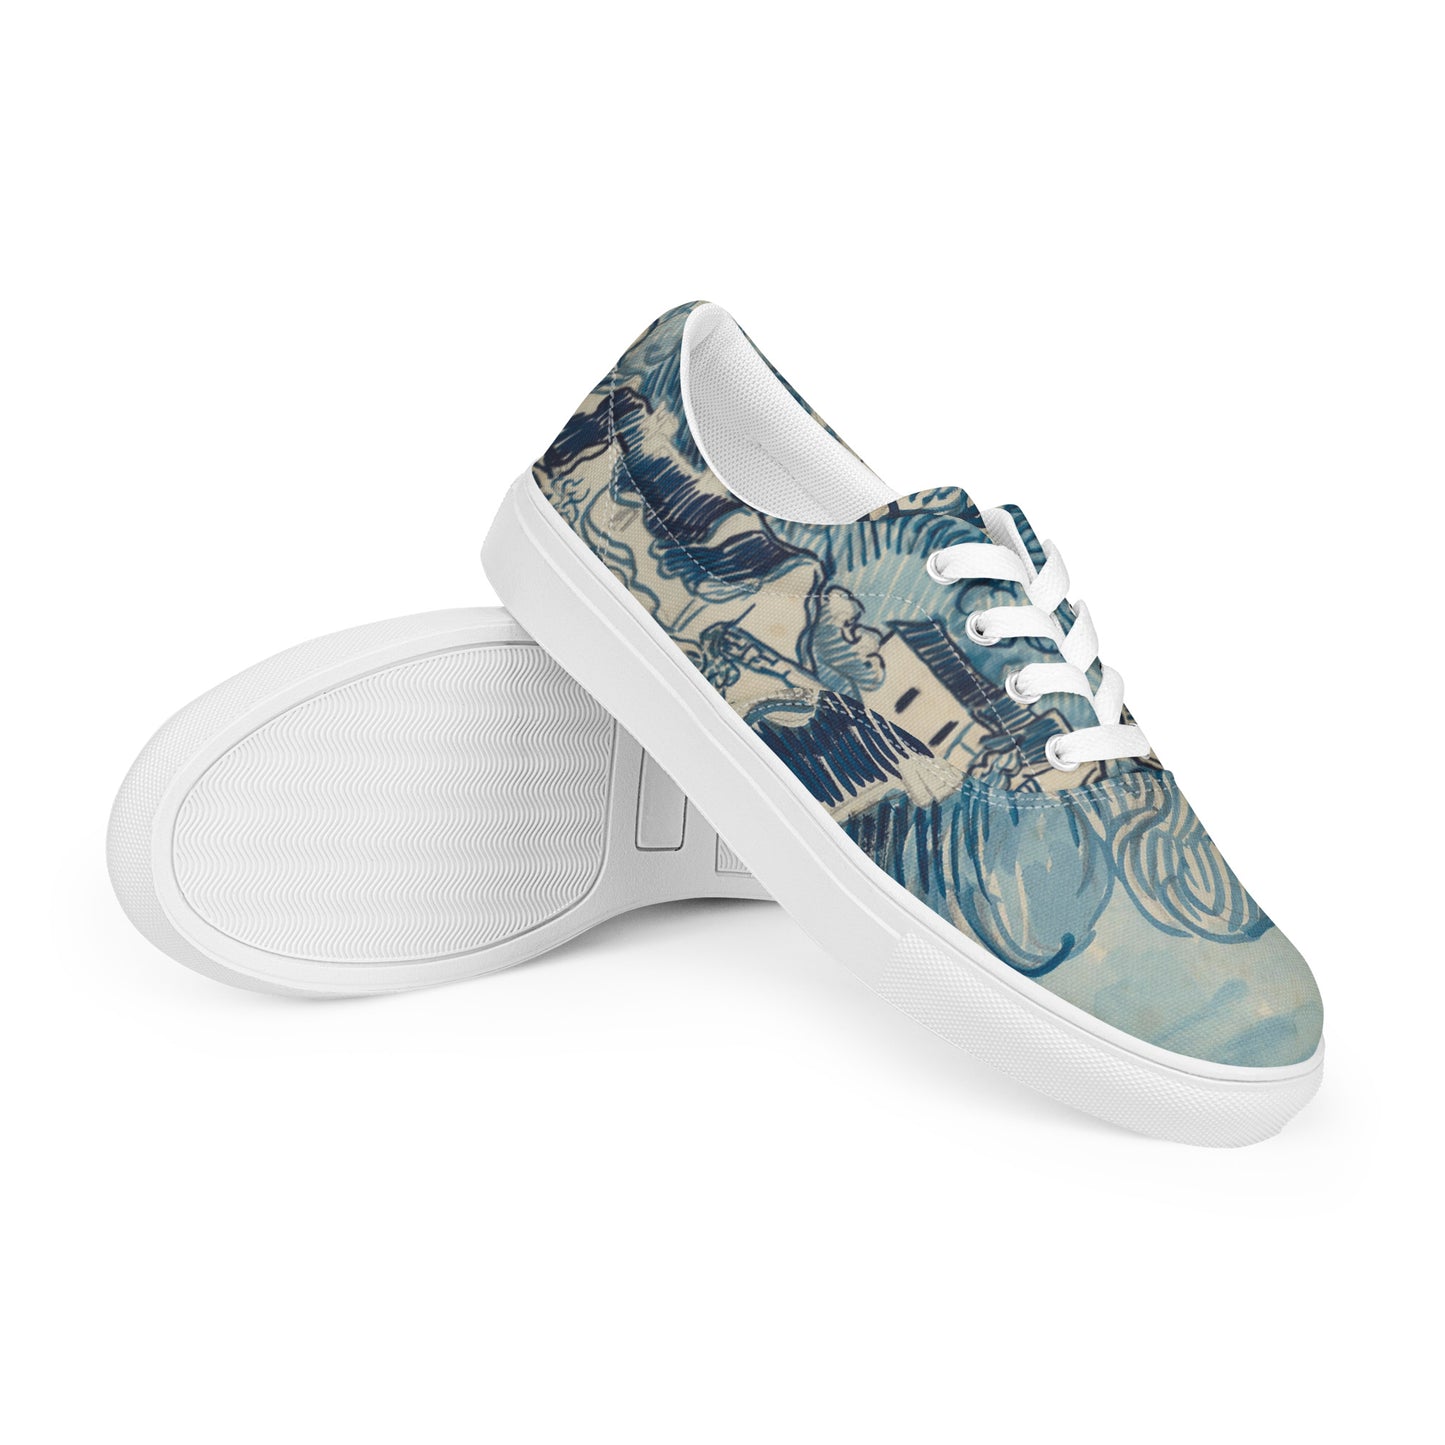 Landscape with Houses Van Gogh Sneakers